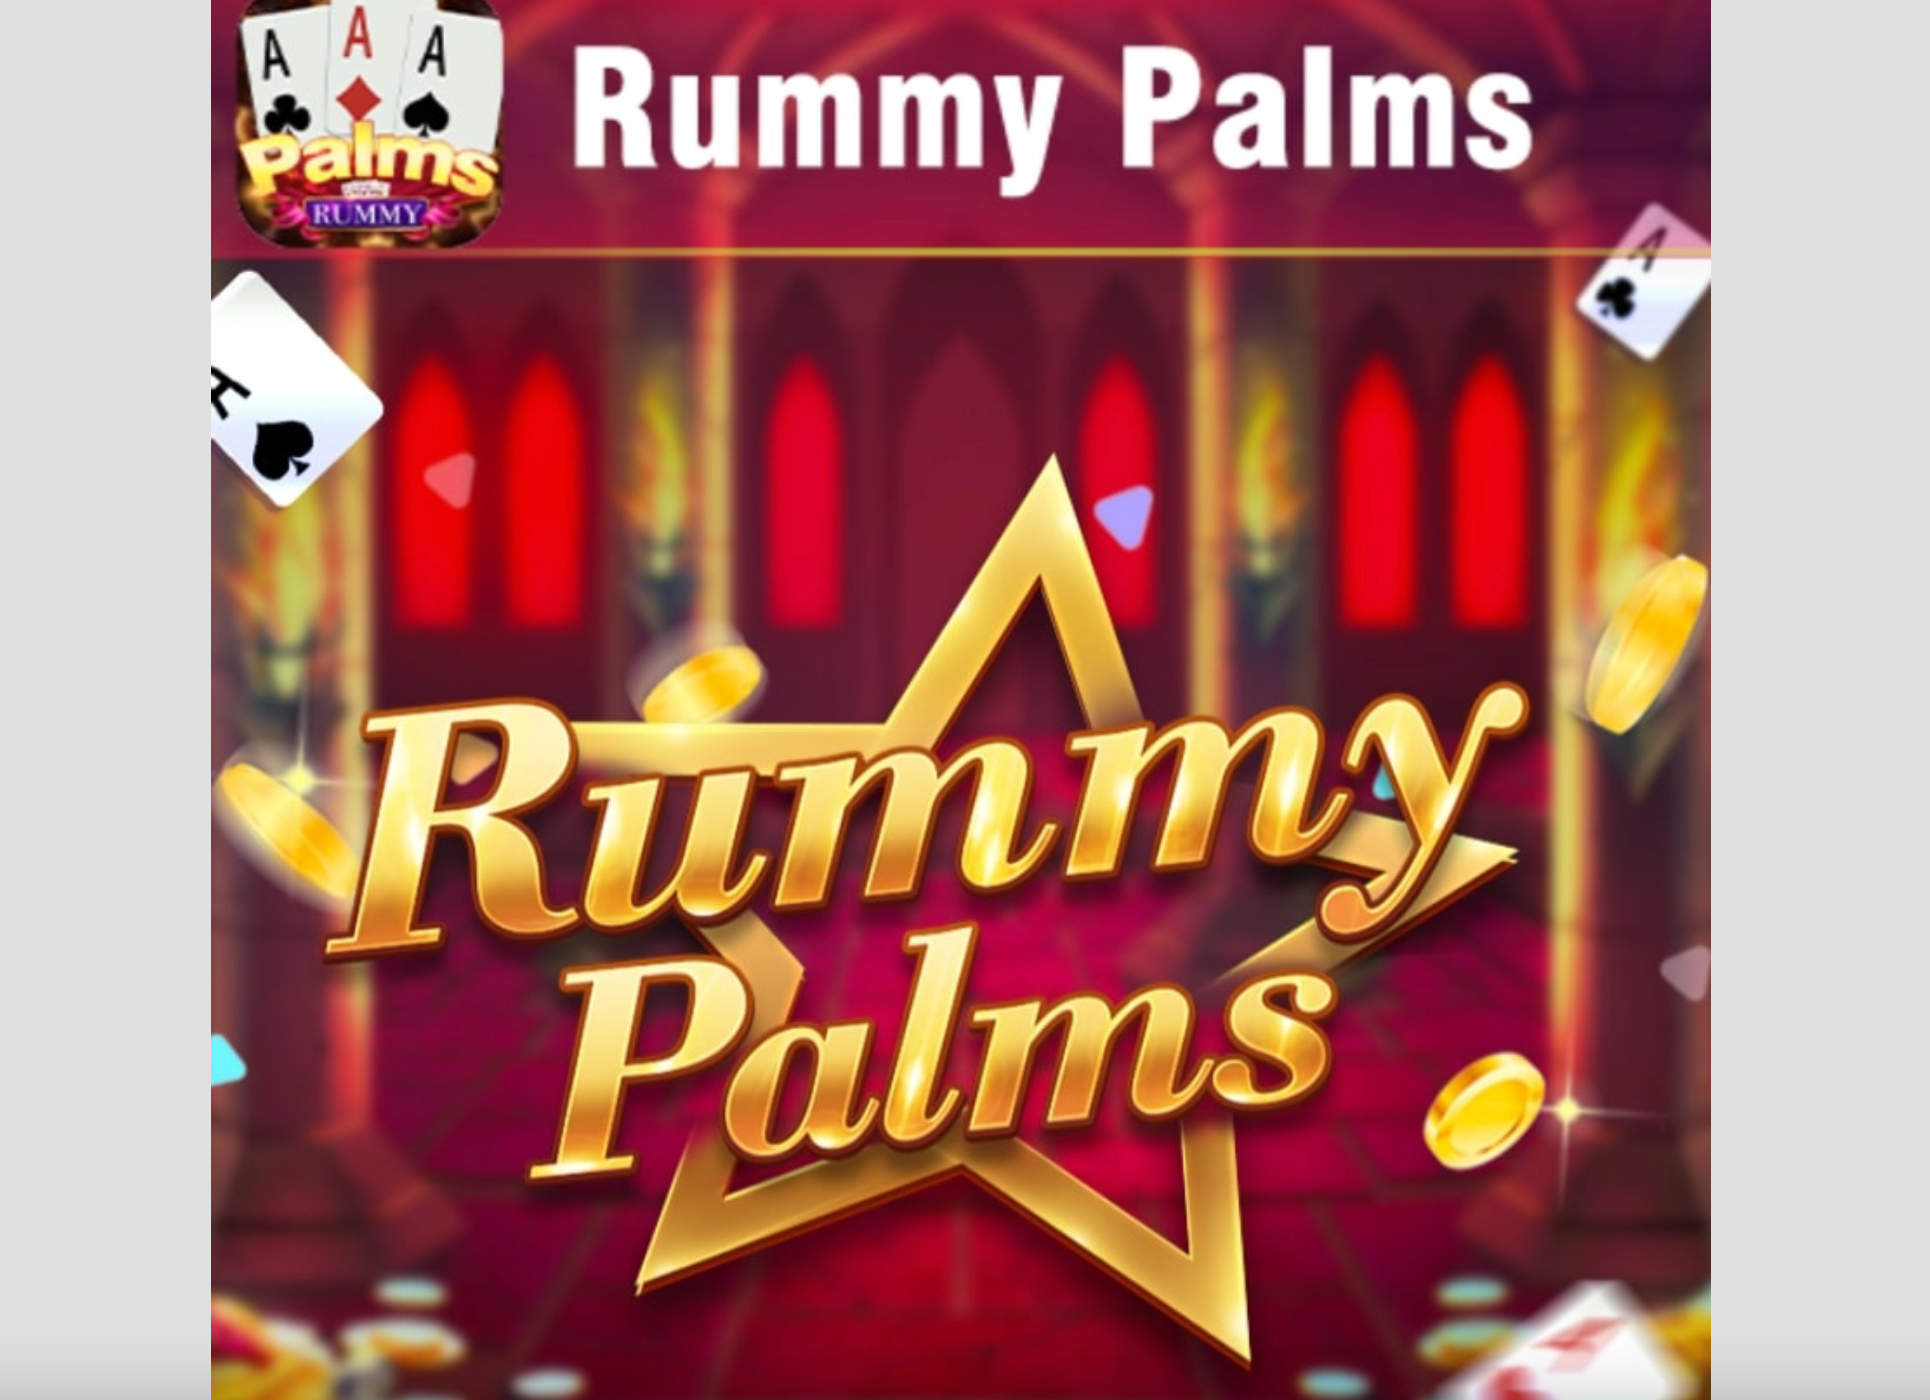 play rummy tournaments, win rummy